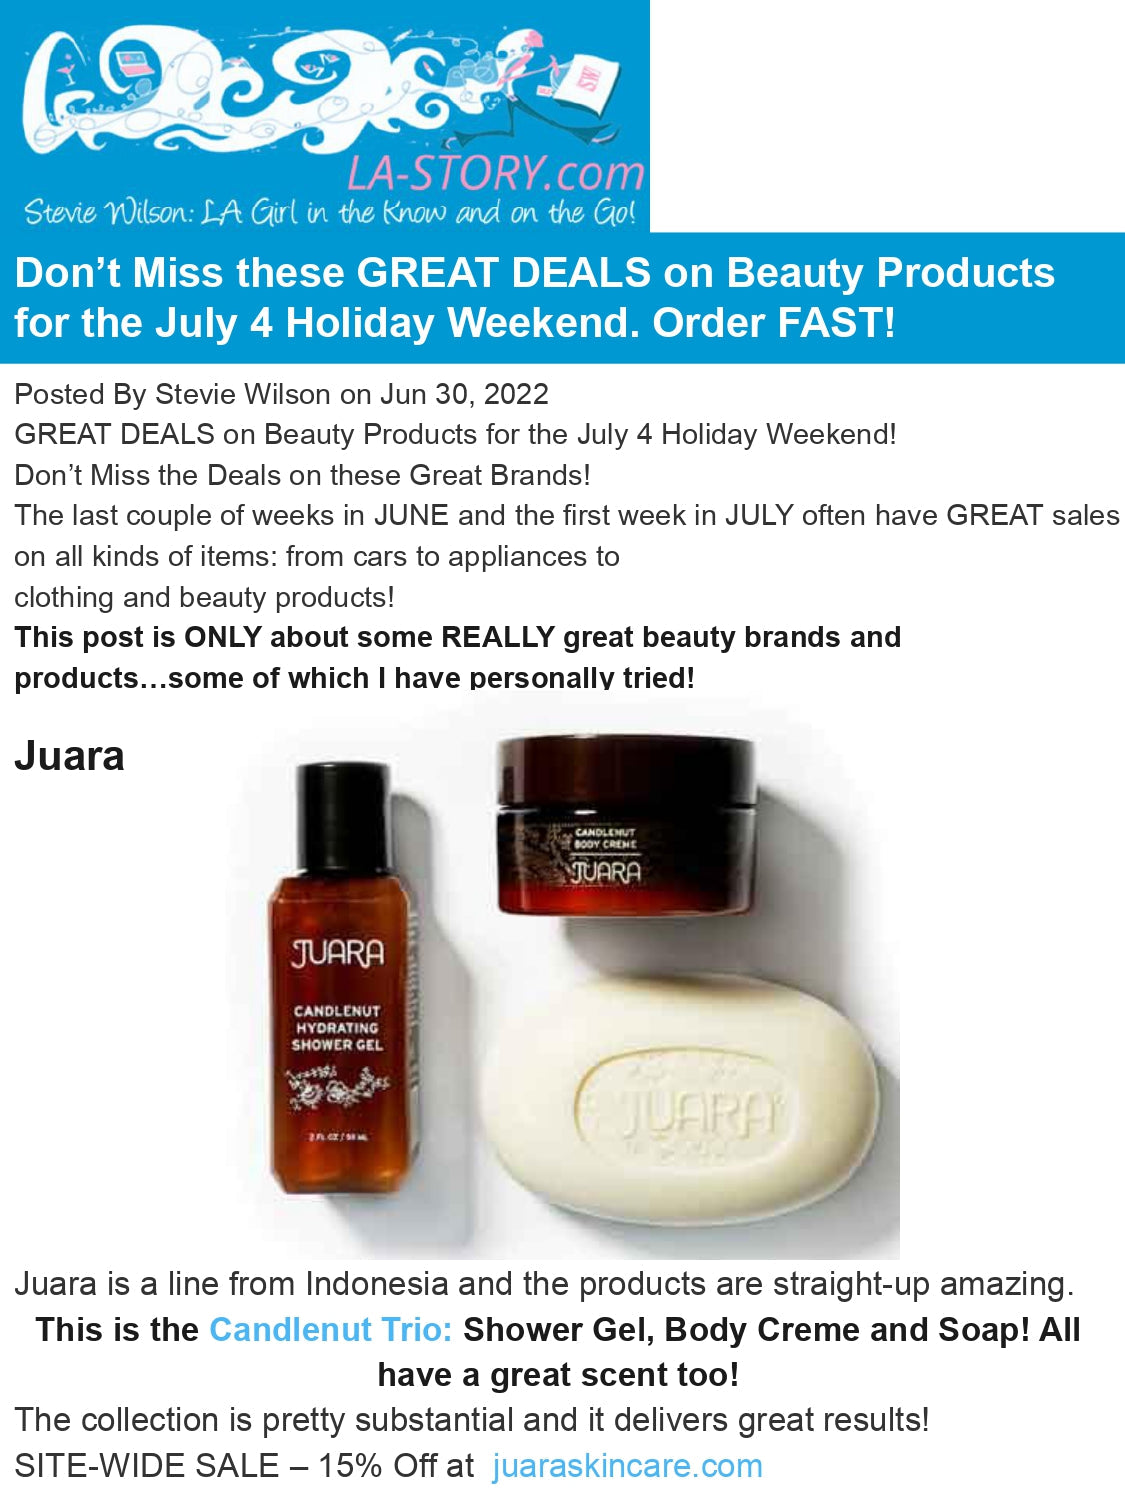 LA STORY: Don’t Miss these GREAT DEALS on Beauty Products for the July 4 Holiday Weekend. Order FAST! JUARA Skincare